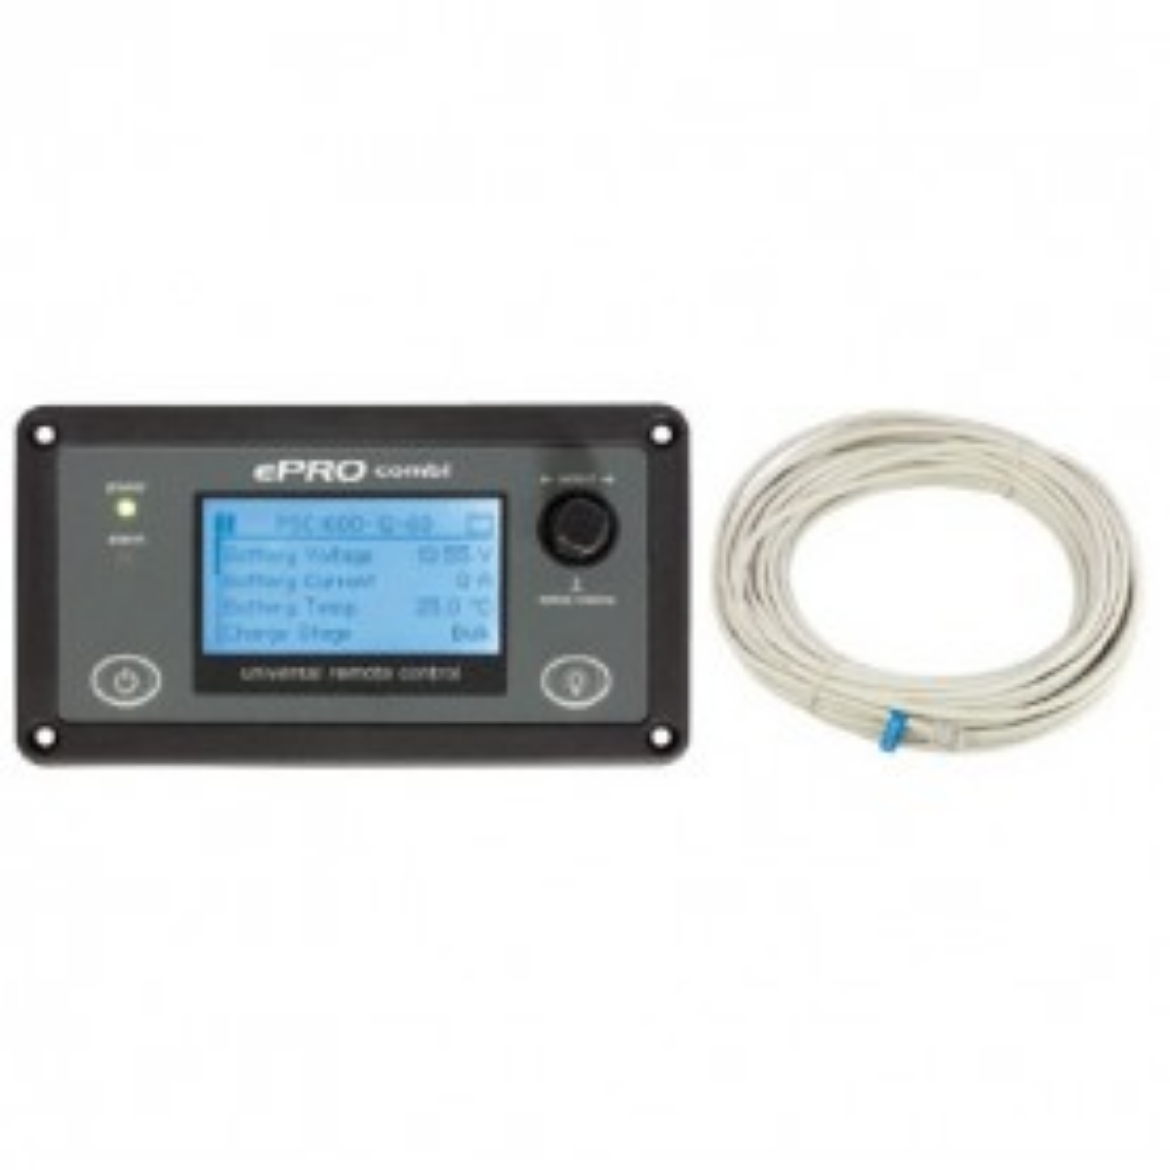 Picture of ENERDRIVE EPRO UNIVERSAL REMOTE CONTROL PANEL TO SUIT ALL EPRO INVERTER/CHARGERS